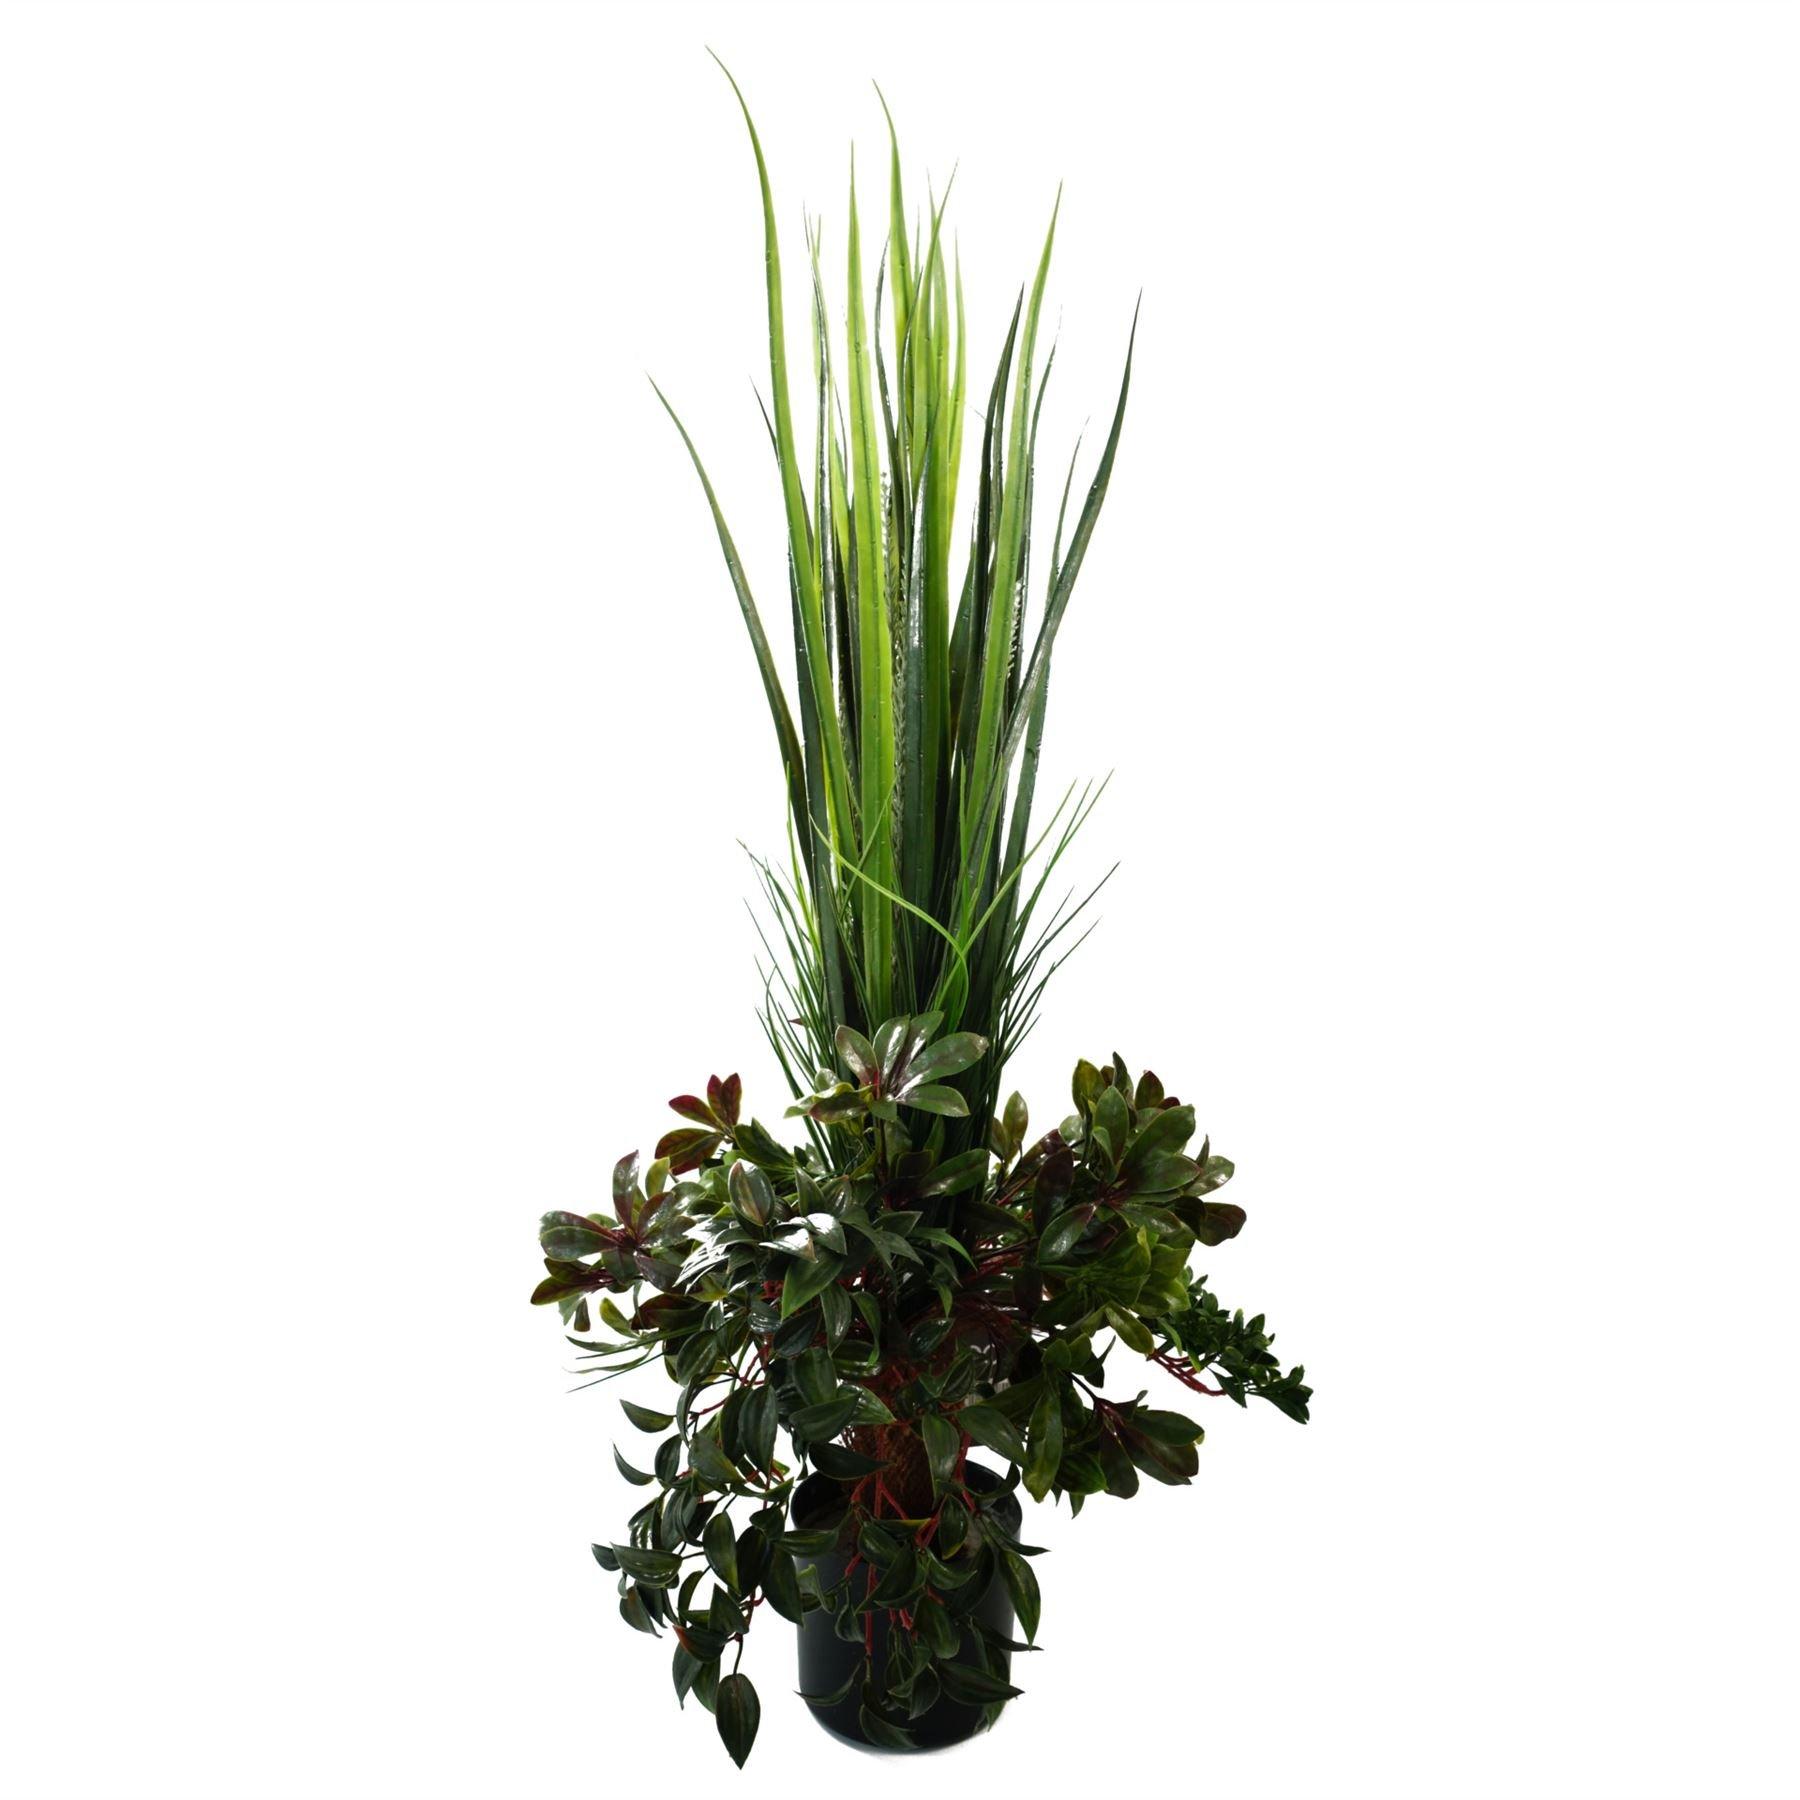 90cm UV Potted UV Grass Plant with Artificial Display Foliage